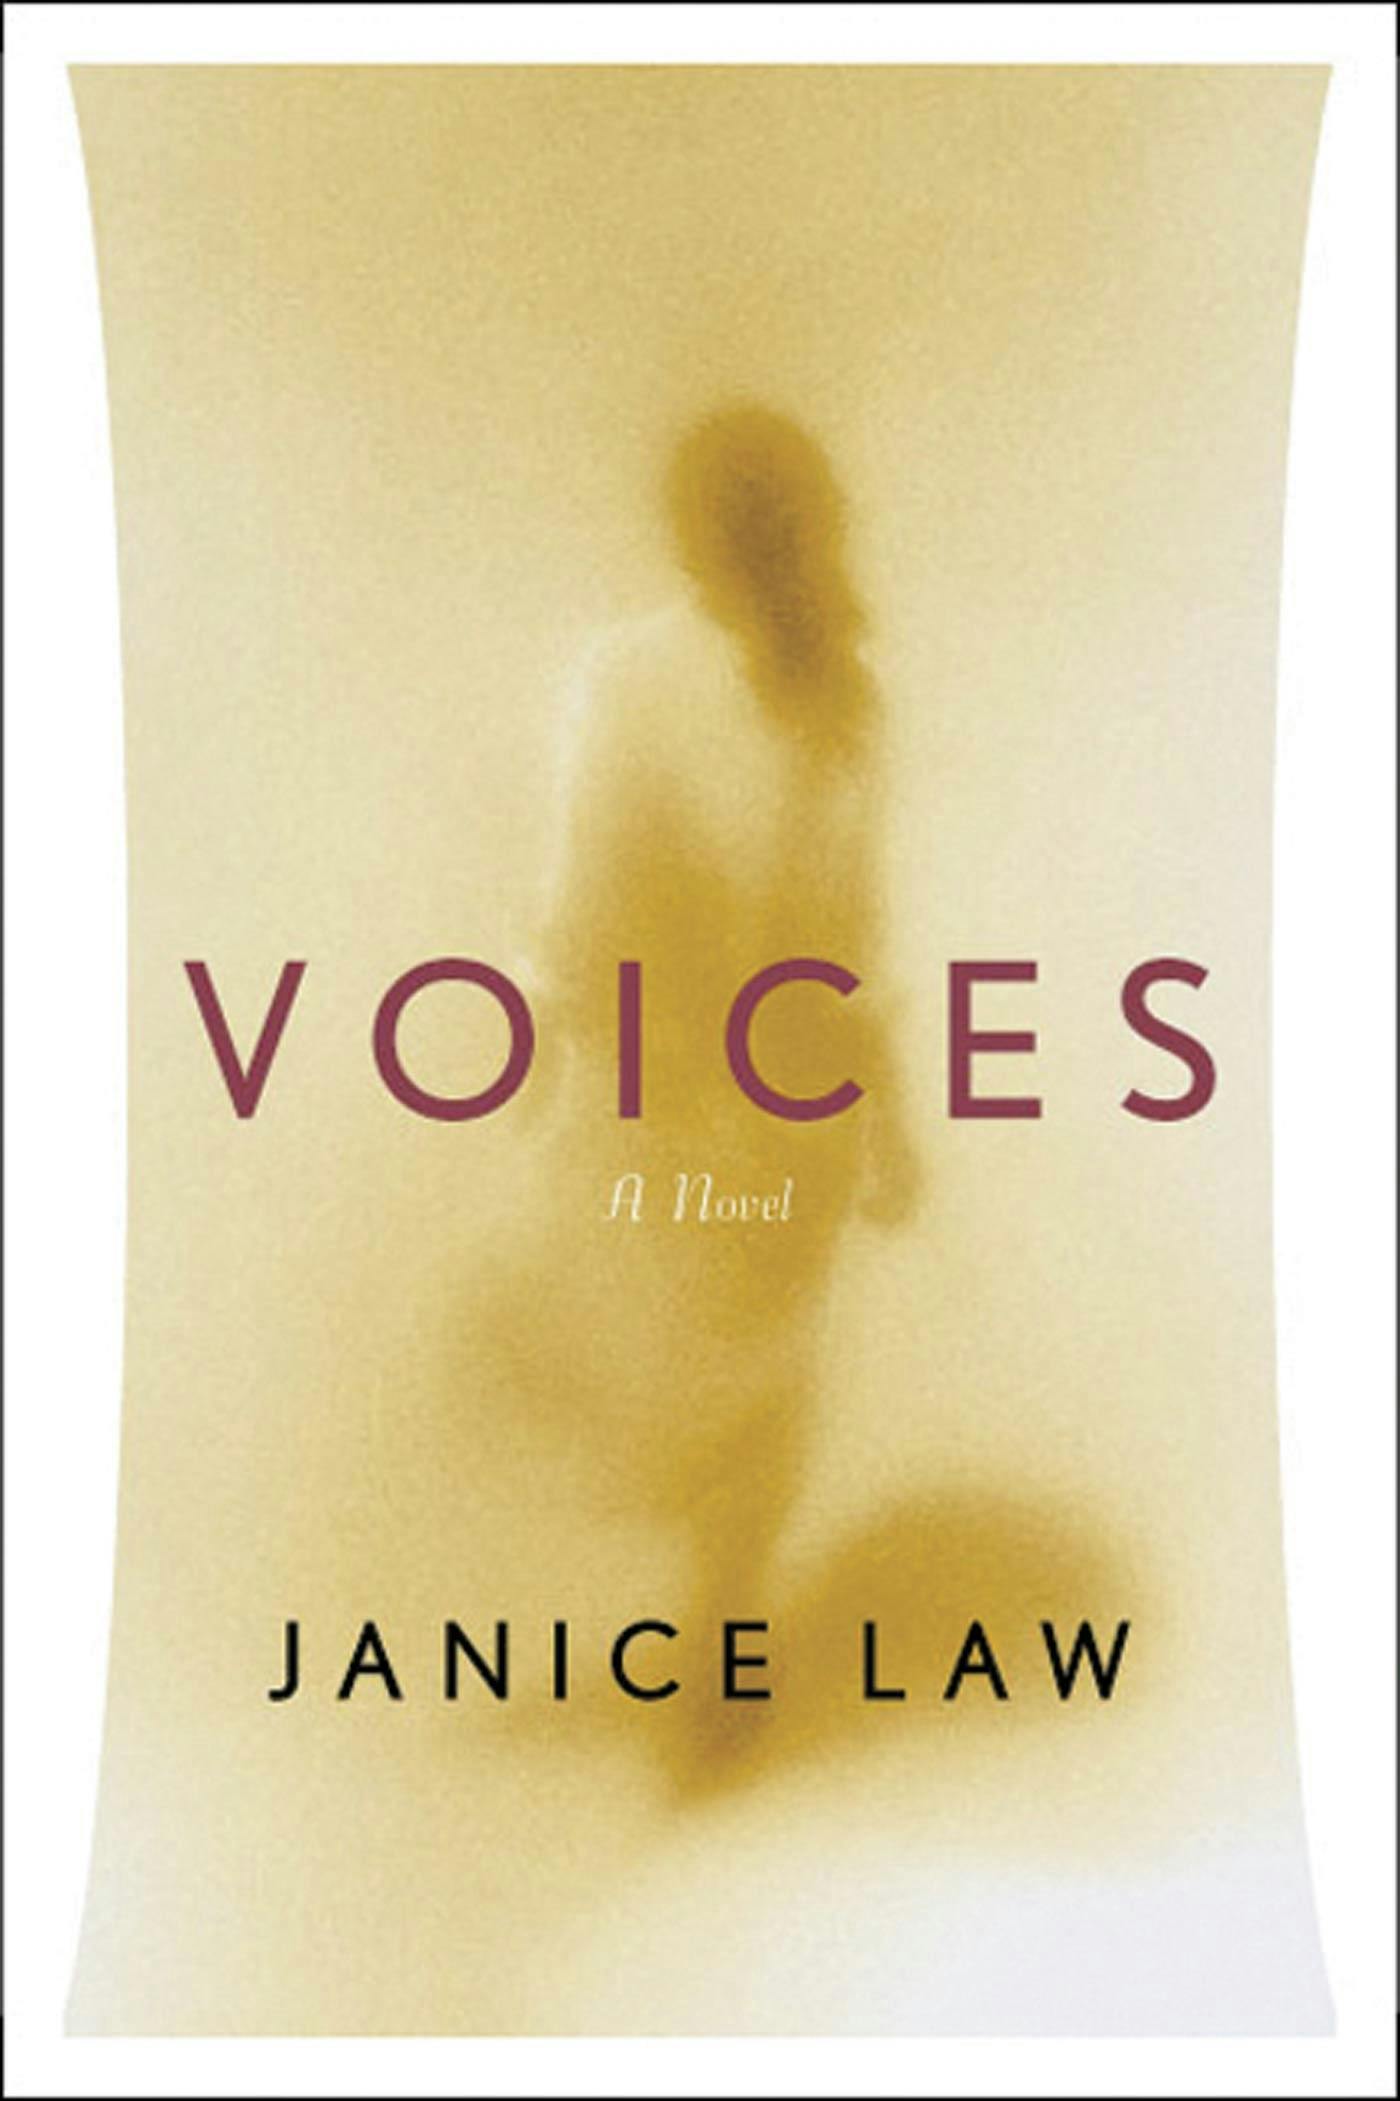 Cover for the book titled as: Voices